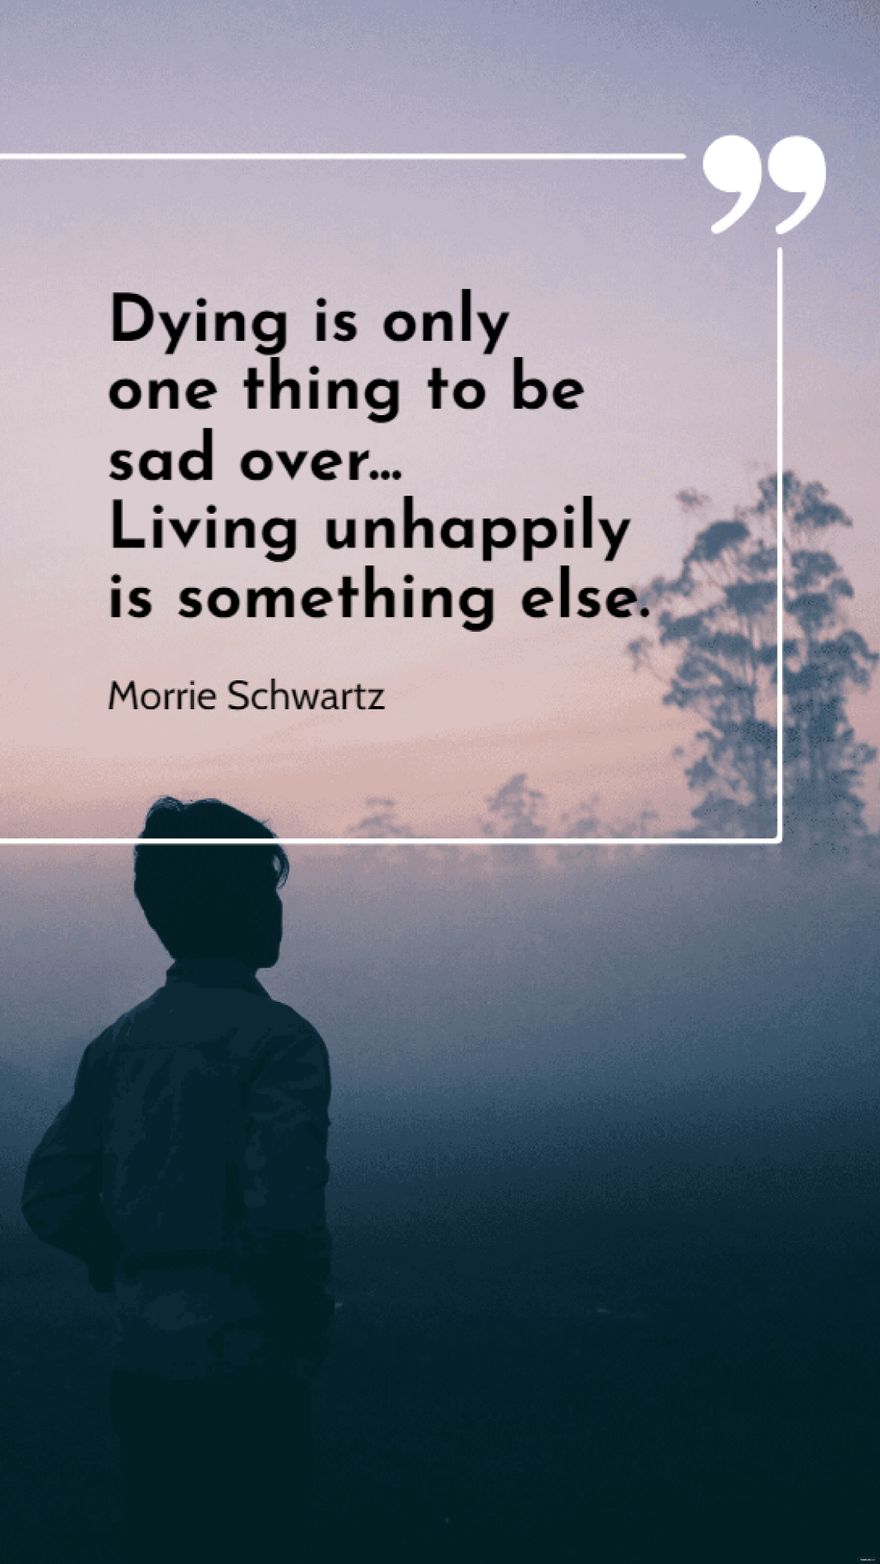 Morrie Schwartz - Dying is only one thing to be sad over... Living unhappily is something else.